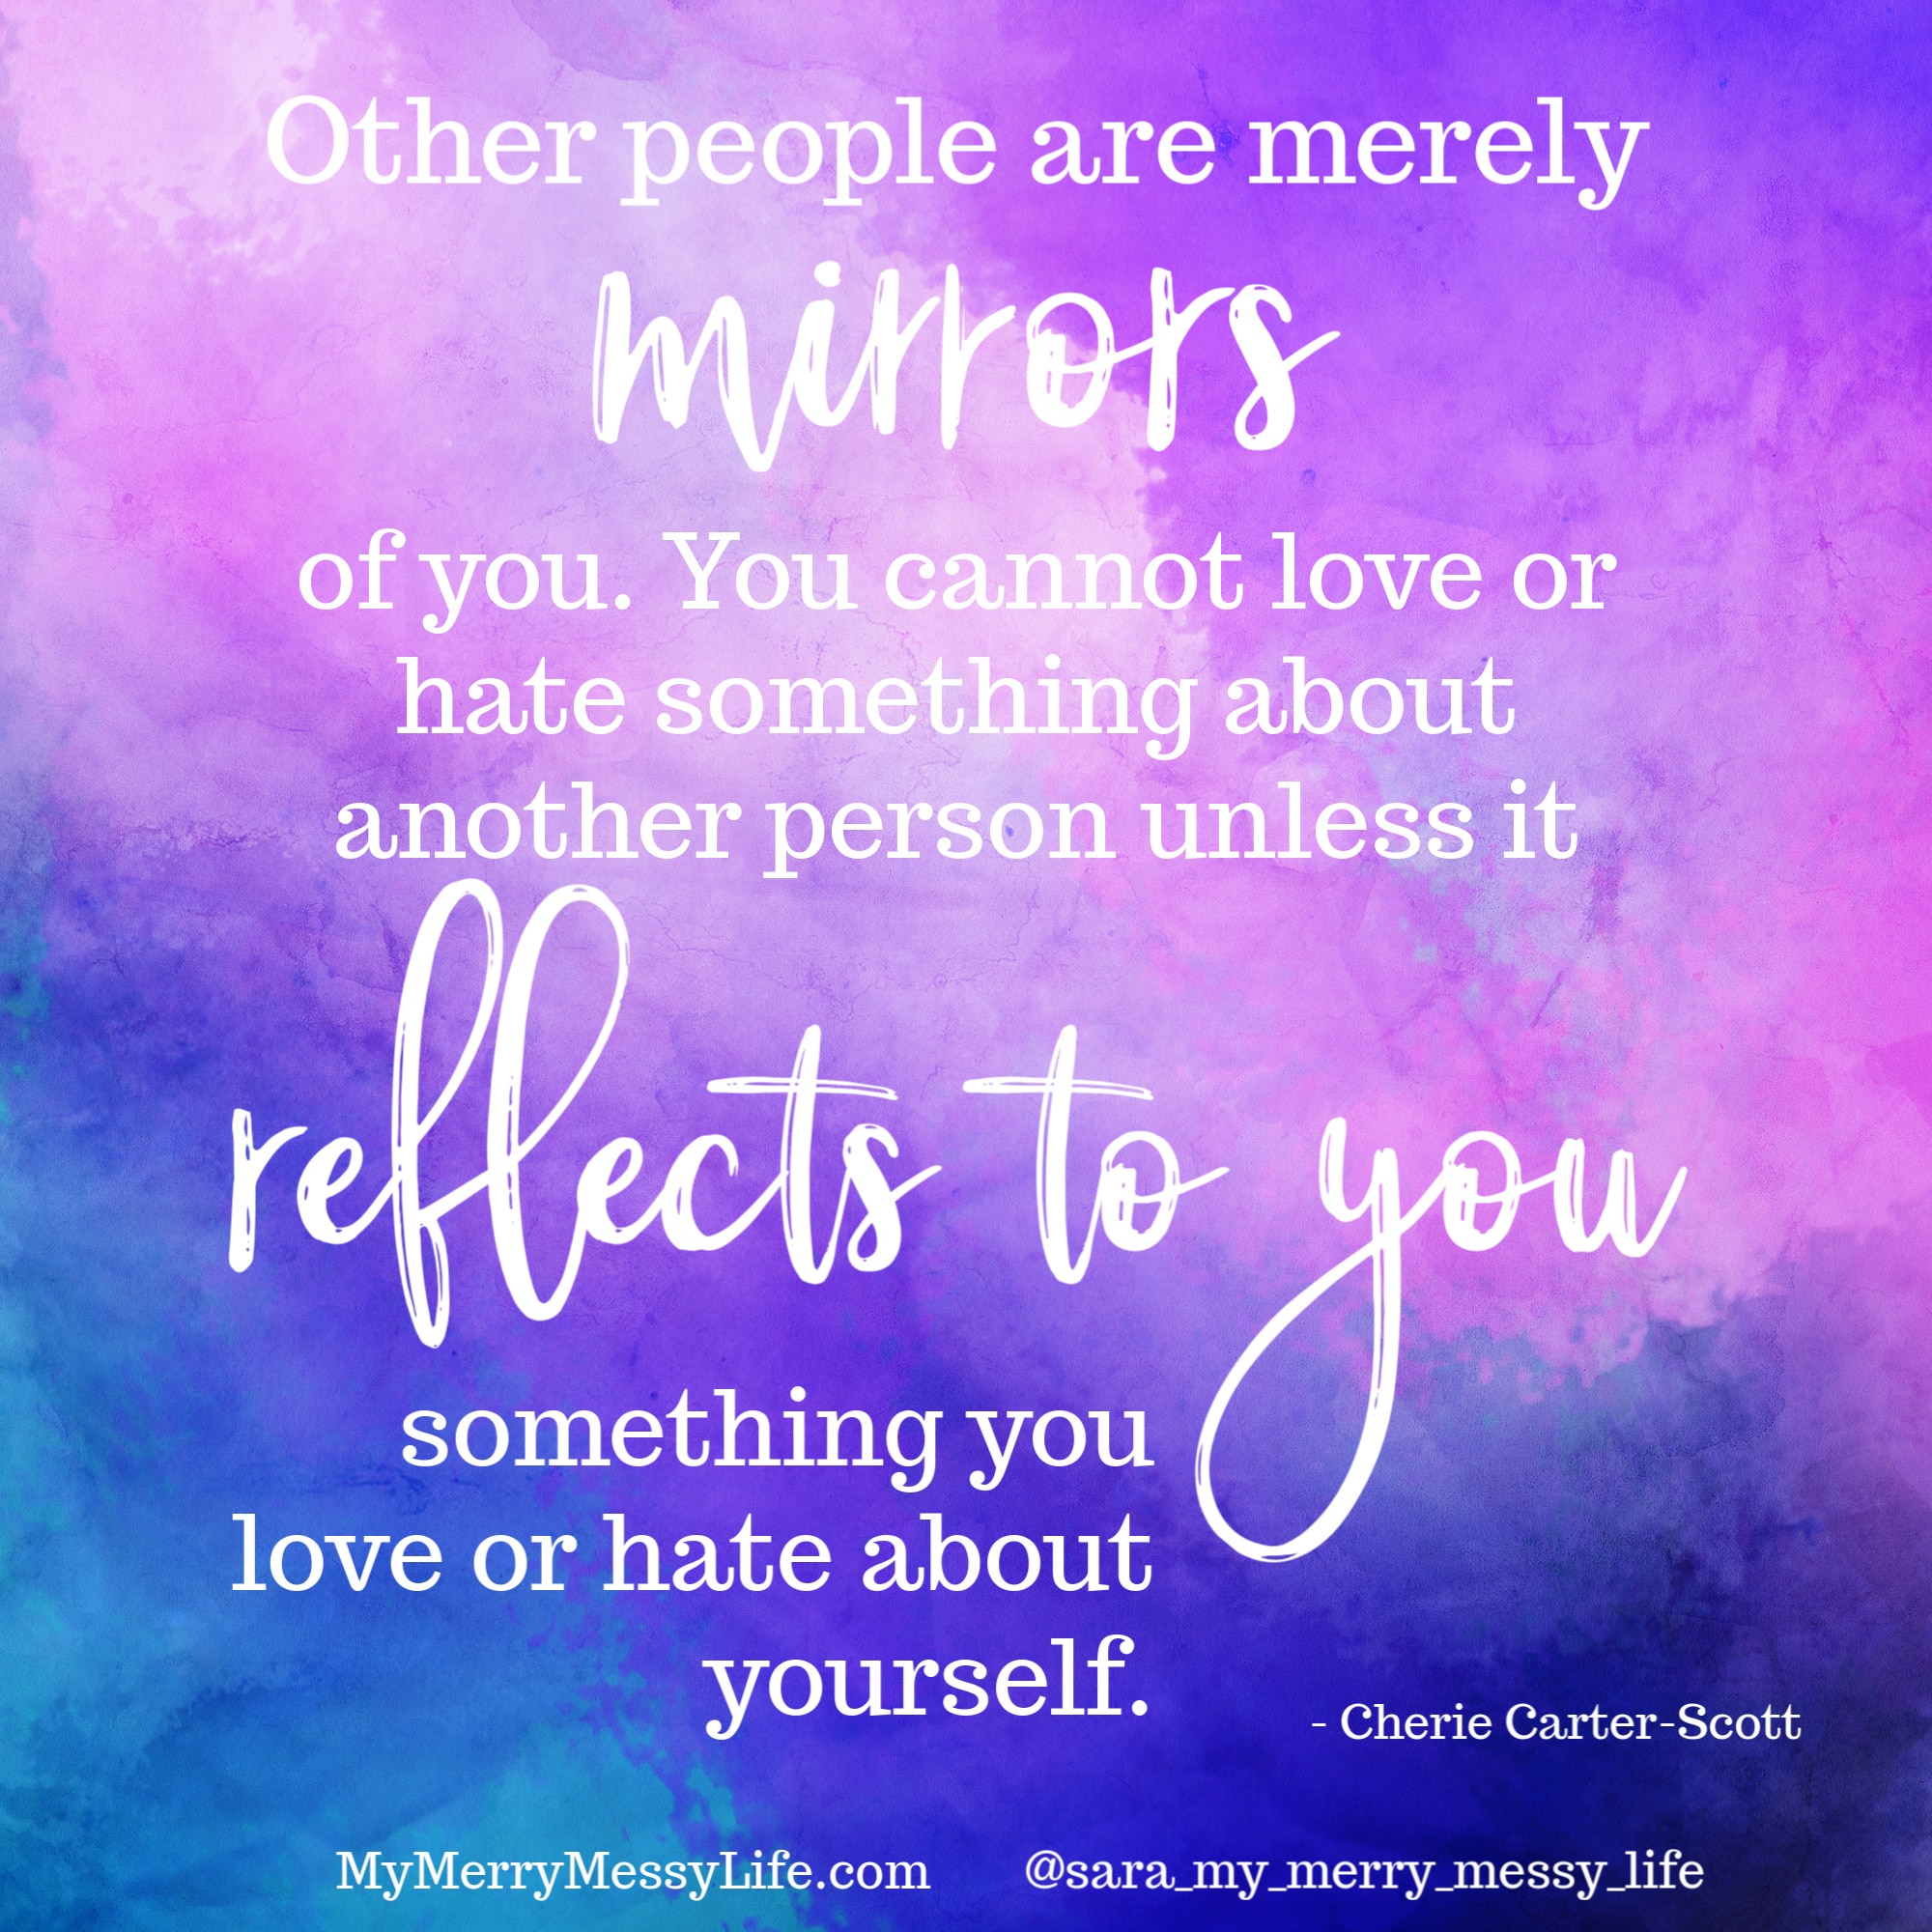 Other people are merely mirrors of you. You cannot love or hate something about another person unless it reflects to you something you love or hate about yourself.  - Carrie Carter-Scott